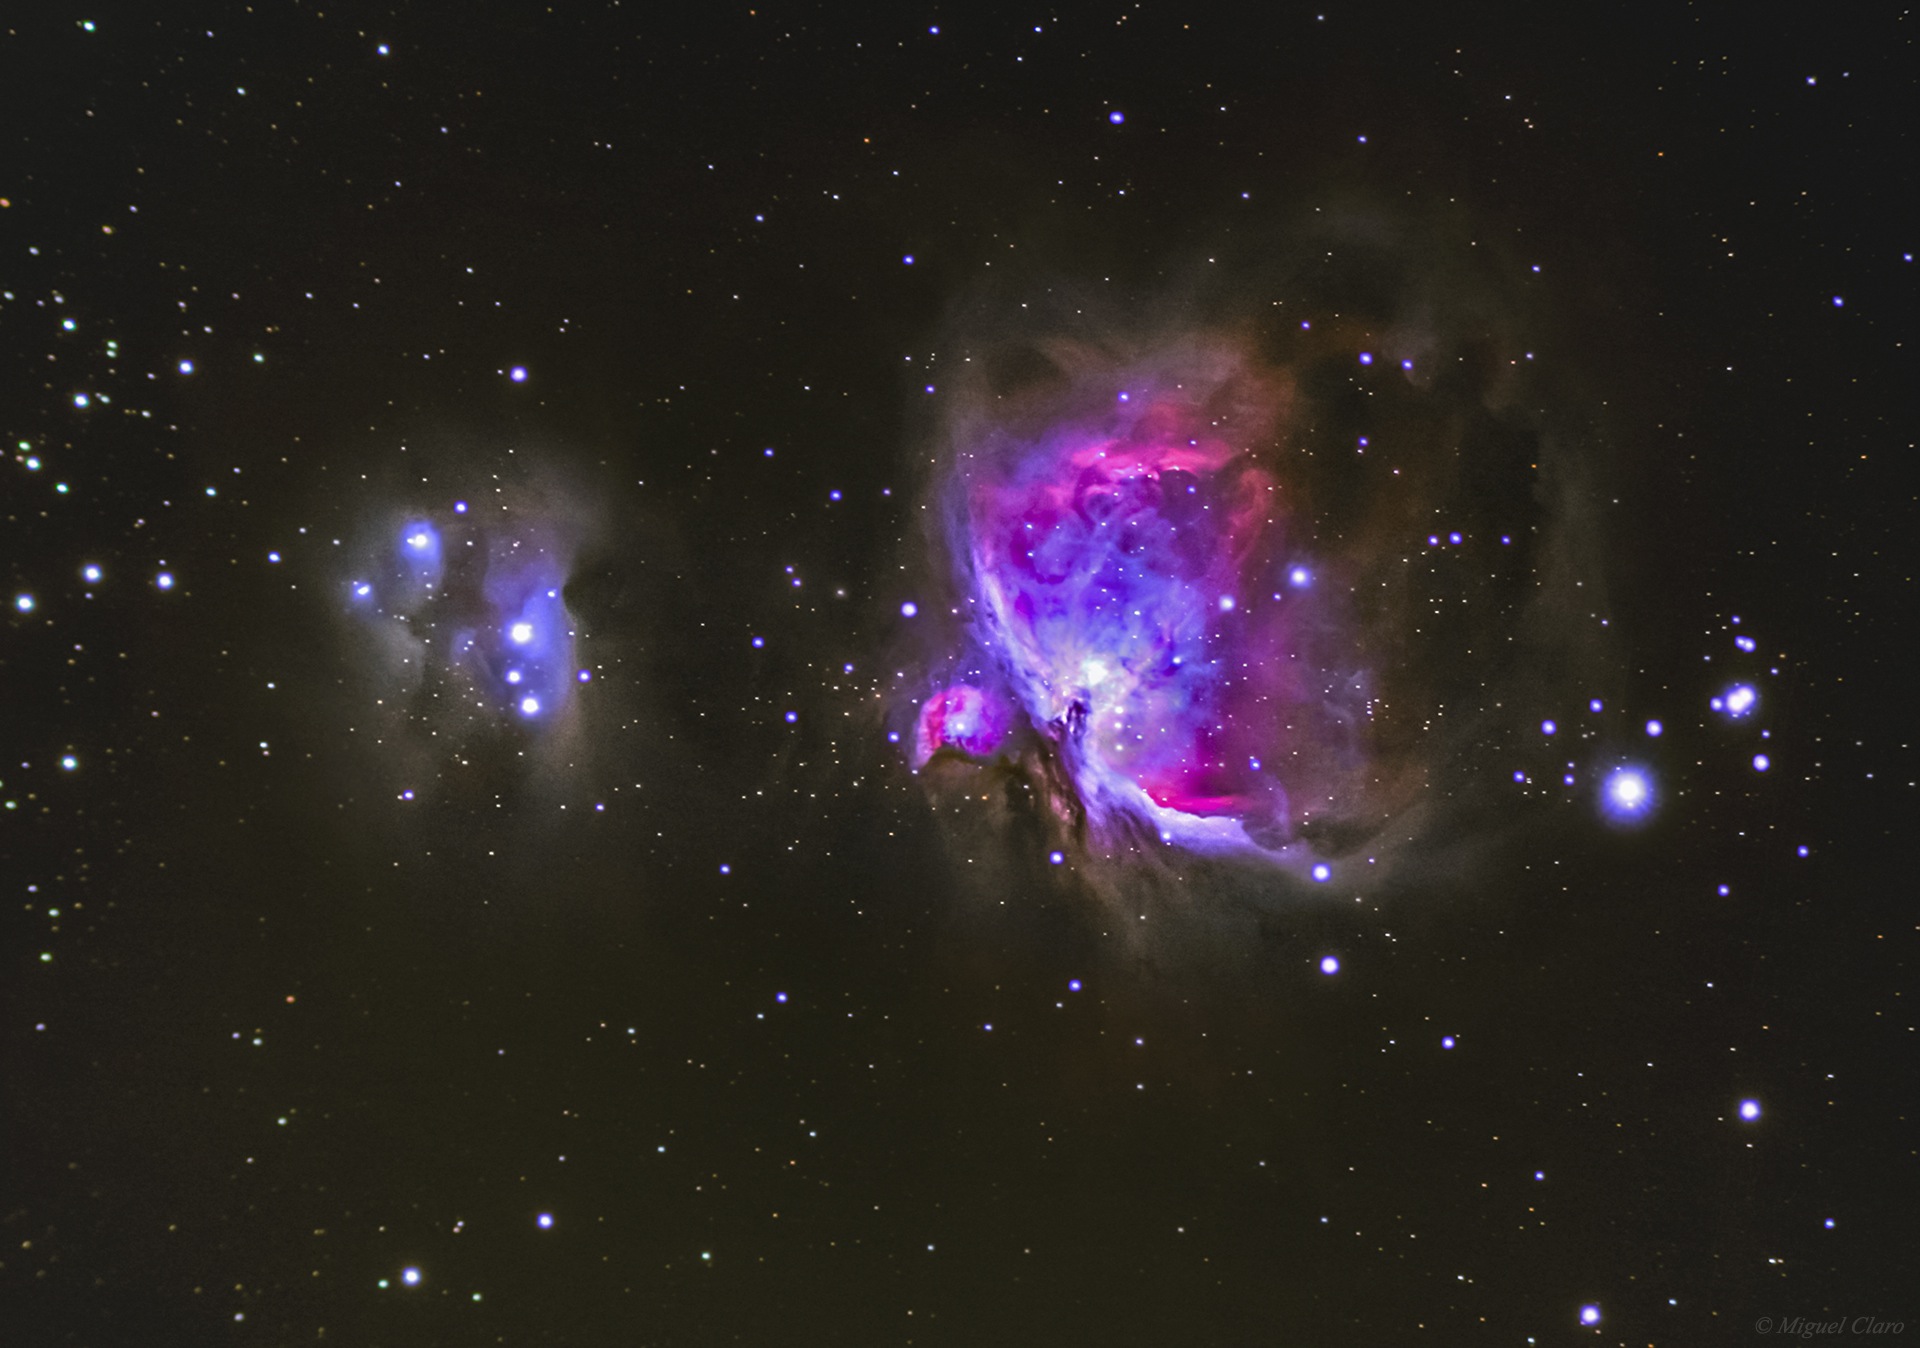 Amateur Astronomer Snaps Stunning Orion Nebula View with Portable Gear (Photo) Space photo